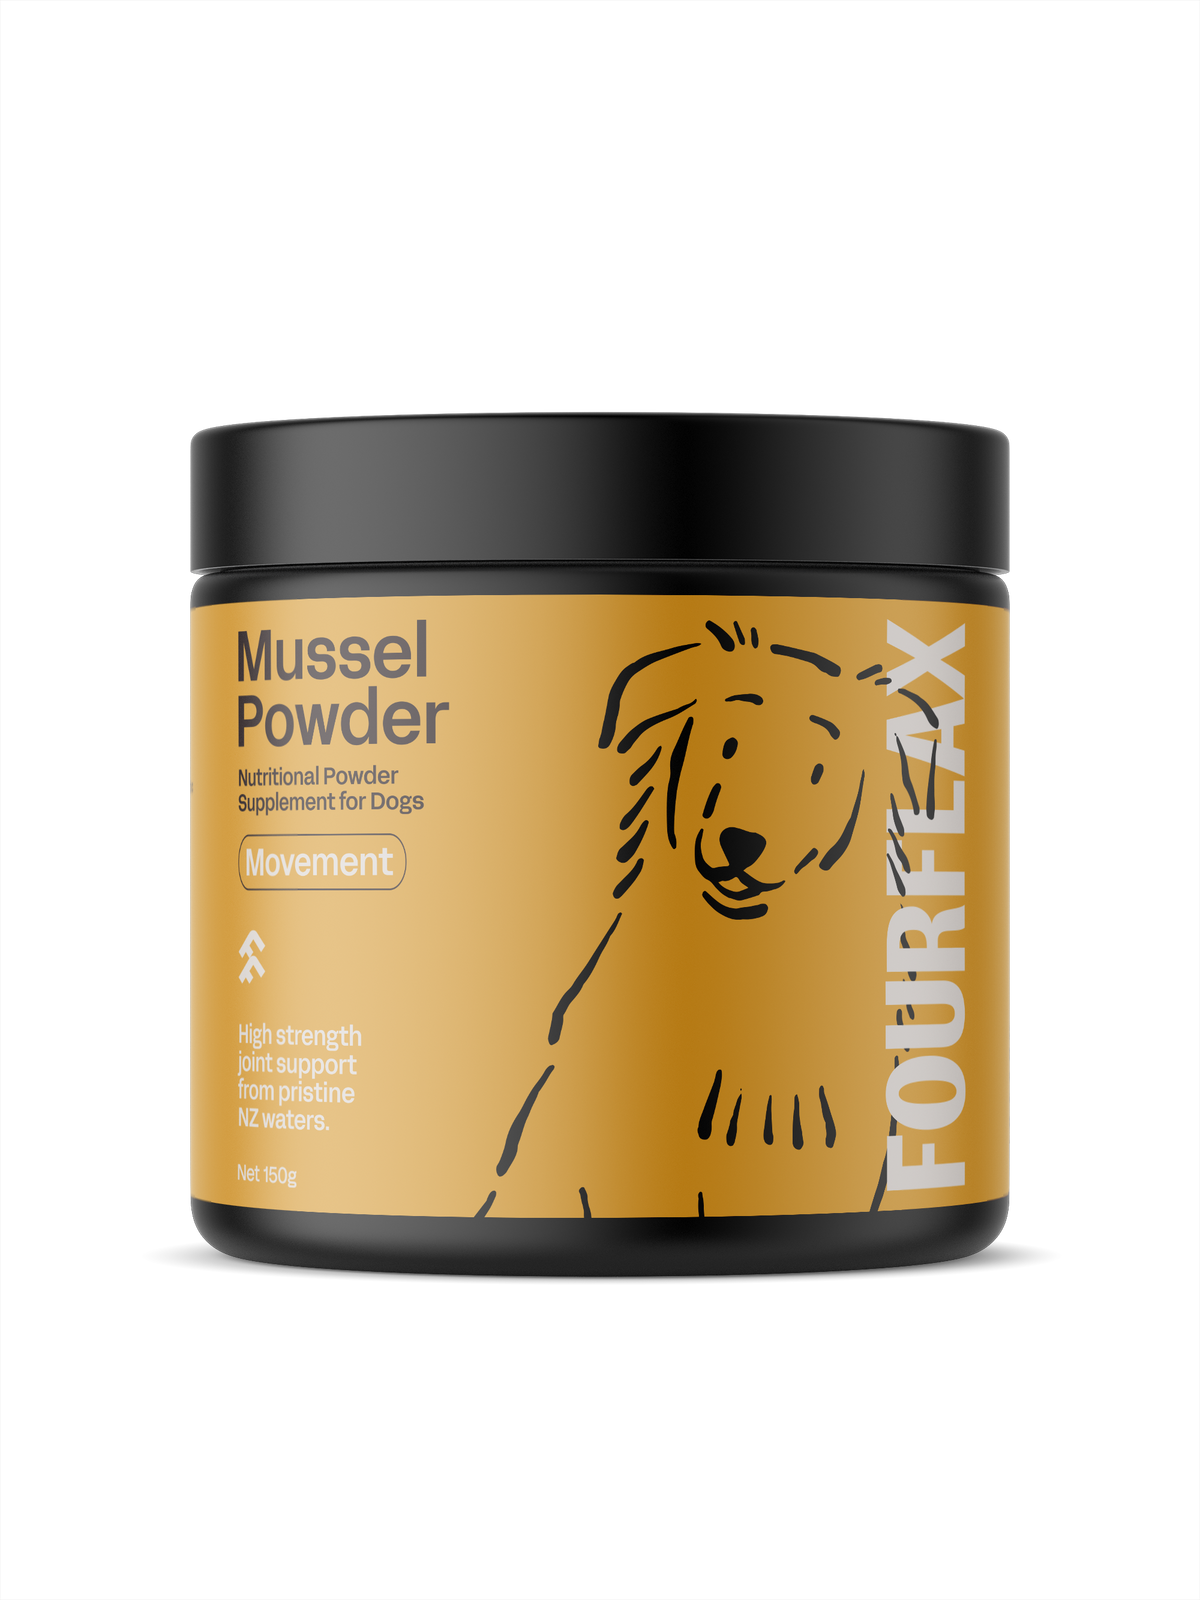 Green lipped mussel powder for dogs NZ